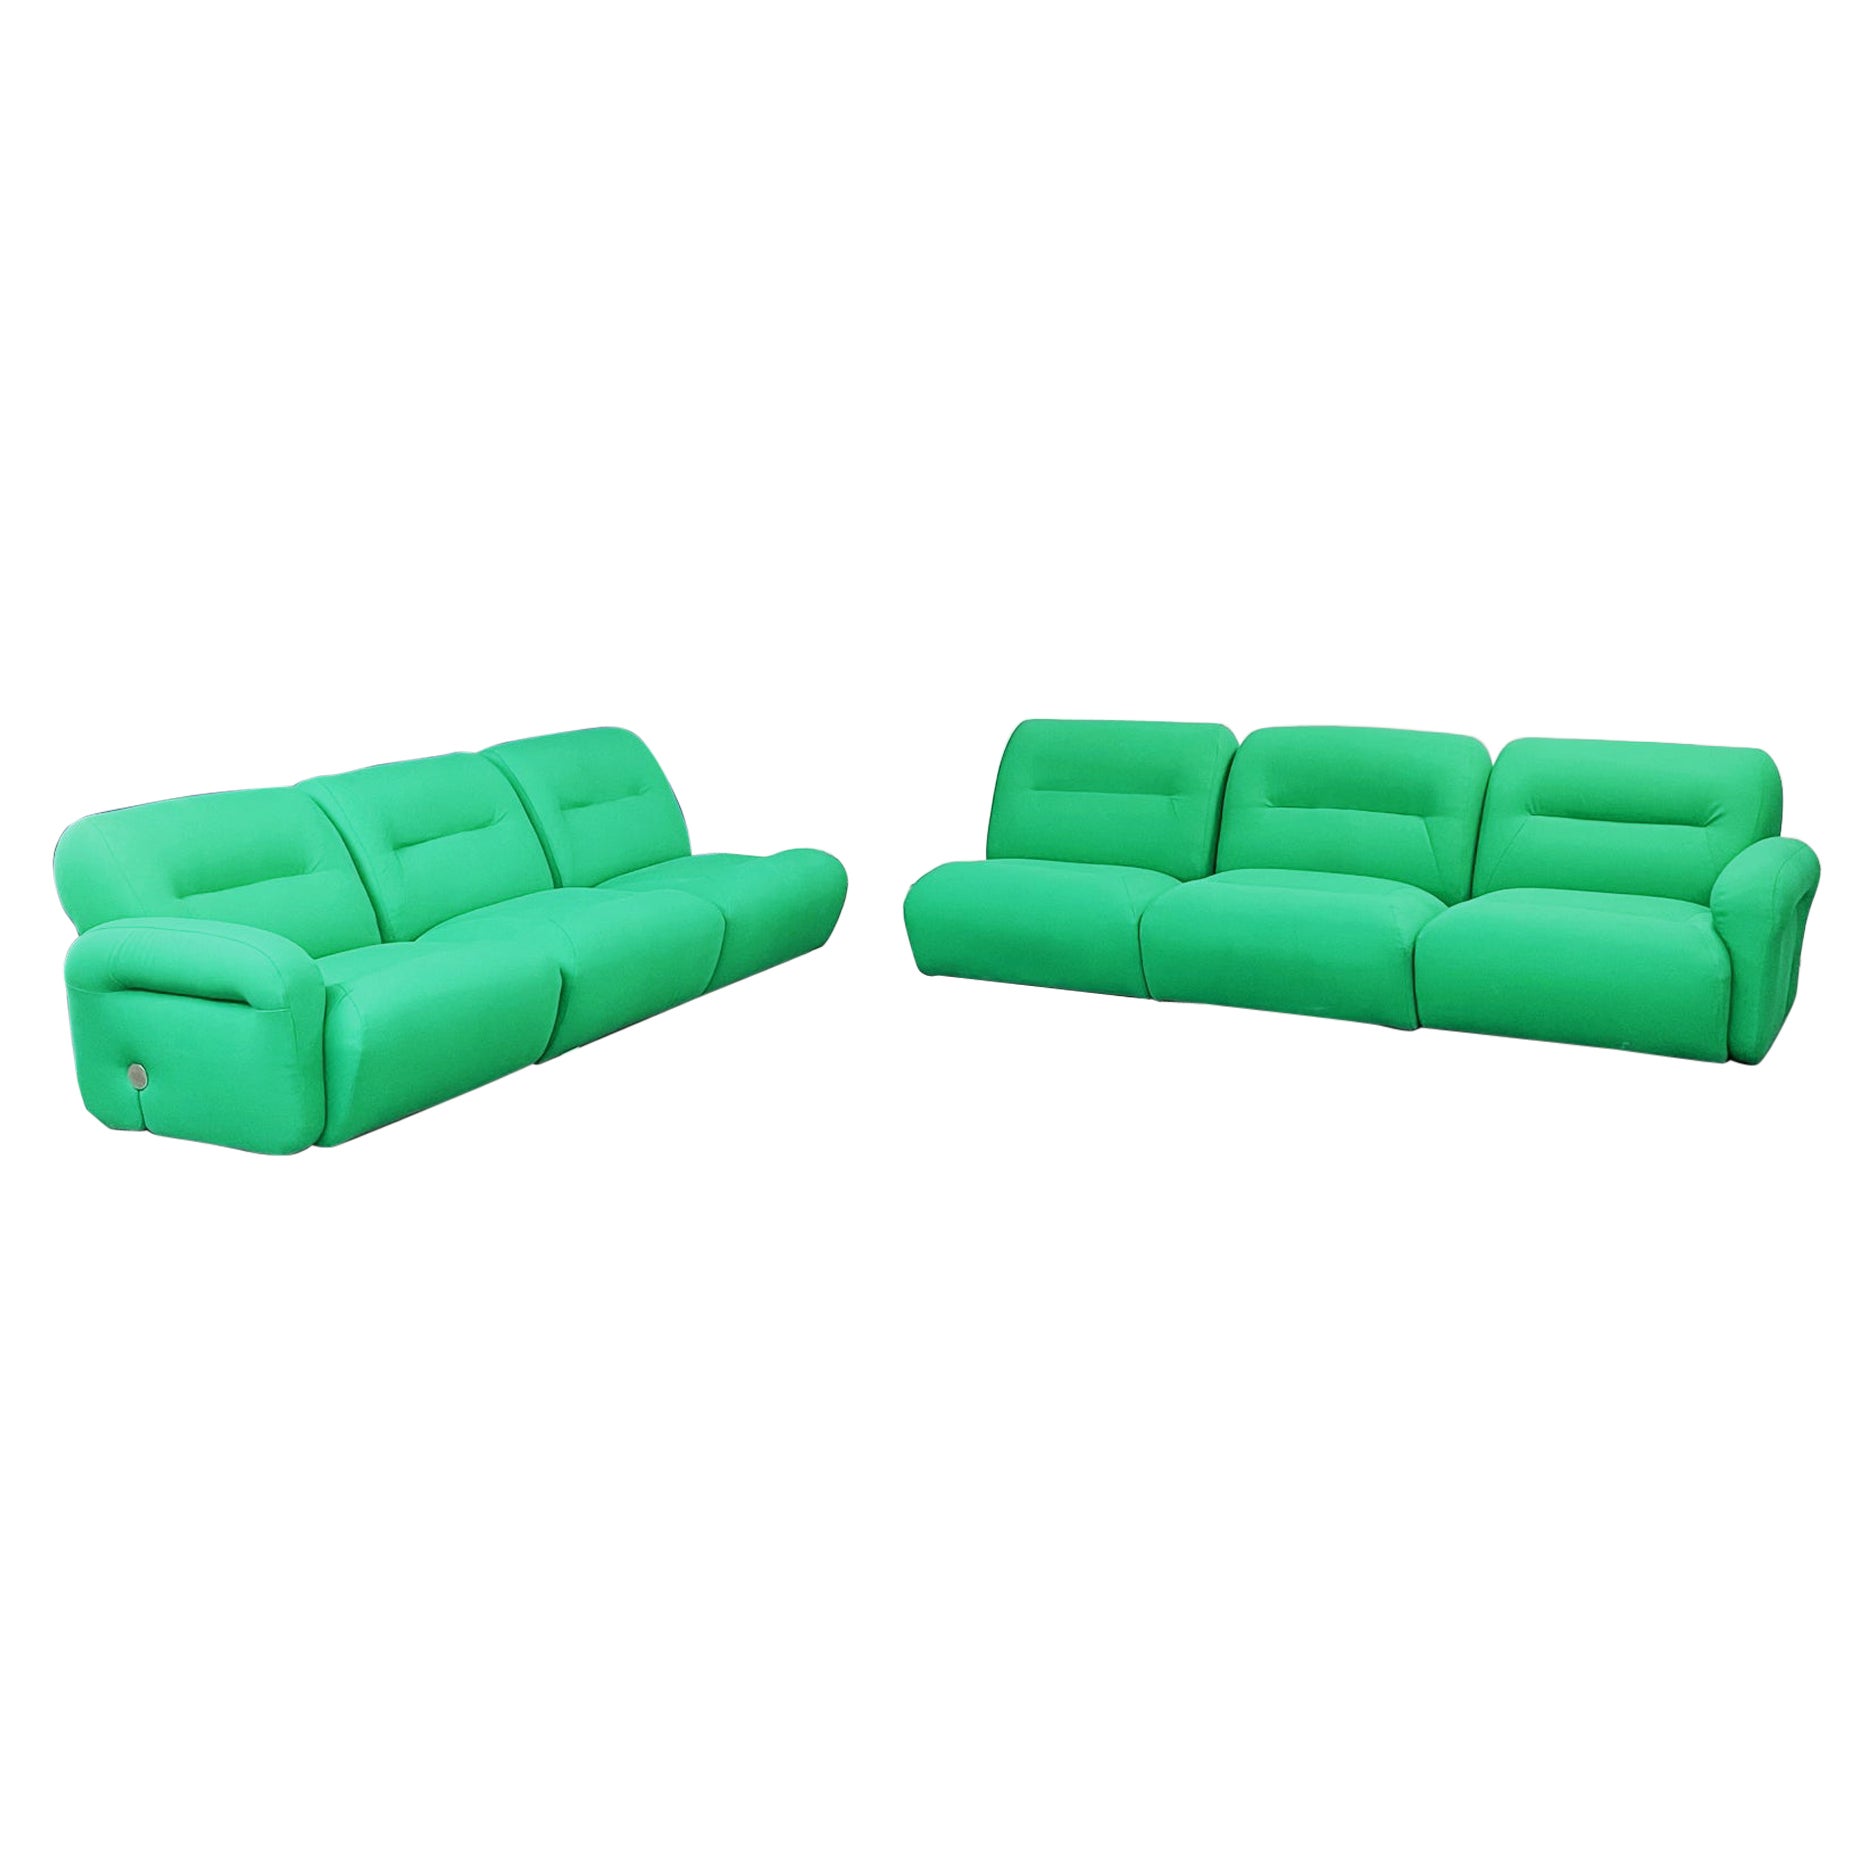 Italian Space Age Modular Sofa in Green Fabric with Metal Insert, 1970s For Sale